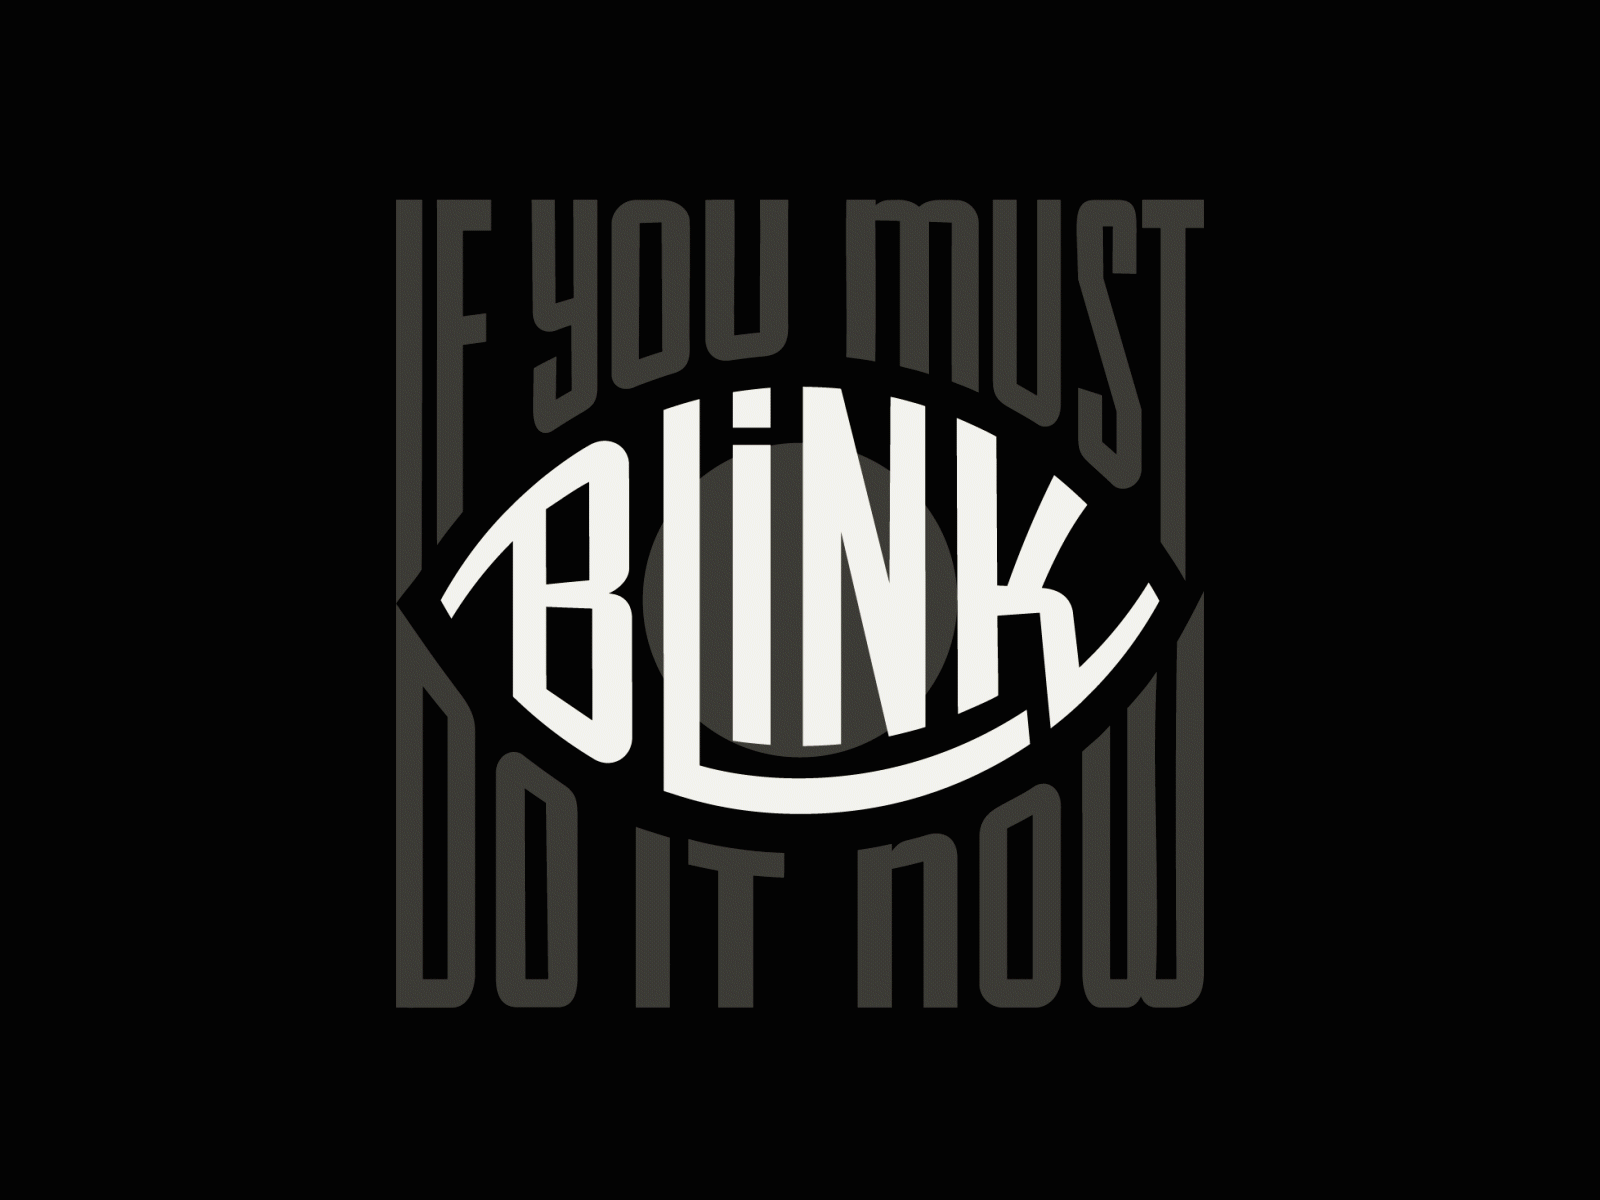 If you must blink, do it now animation blink blinking blinking eye eye fan art kubo kubo and the two strings lettering movie quote typography vector graphic